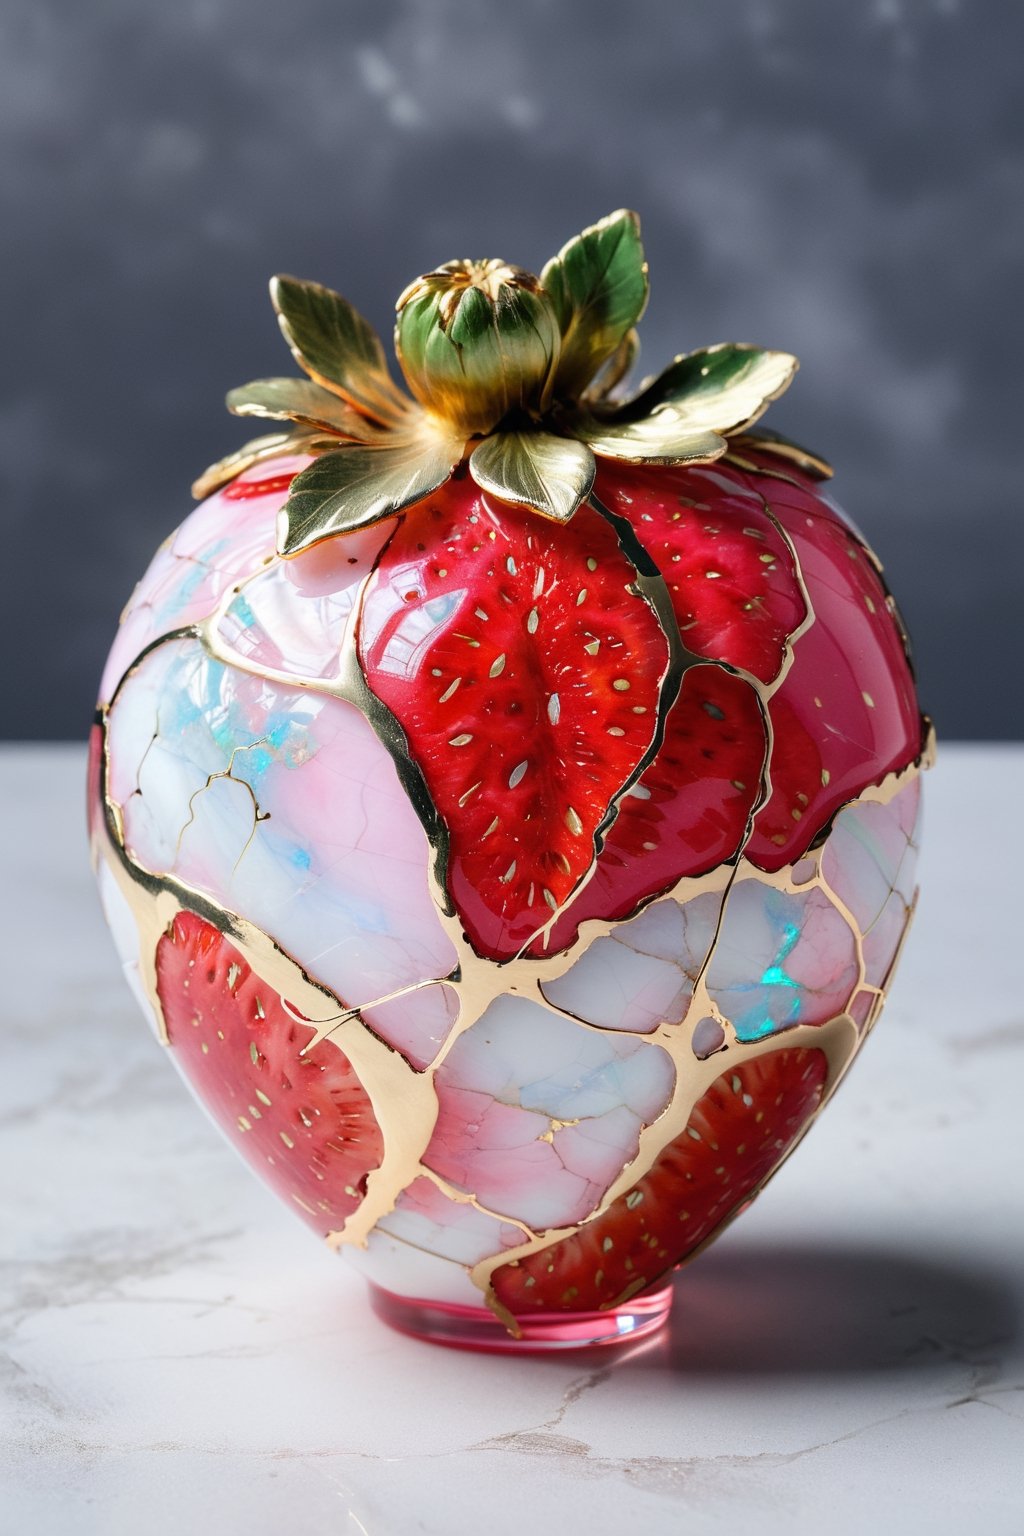 Product photo, kintsugi art strawberry, decorated with starry opal, lacquer style, pink and white, delicate light.